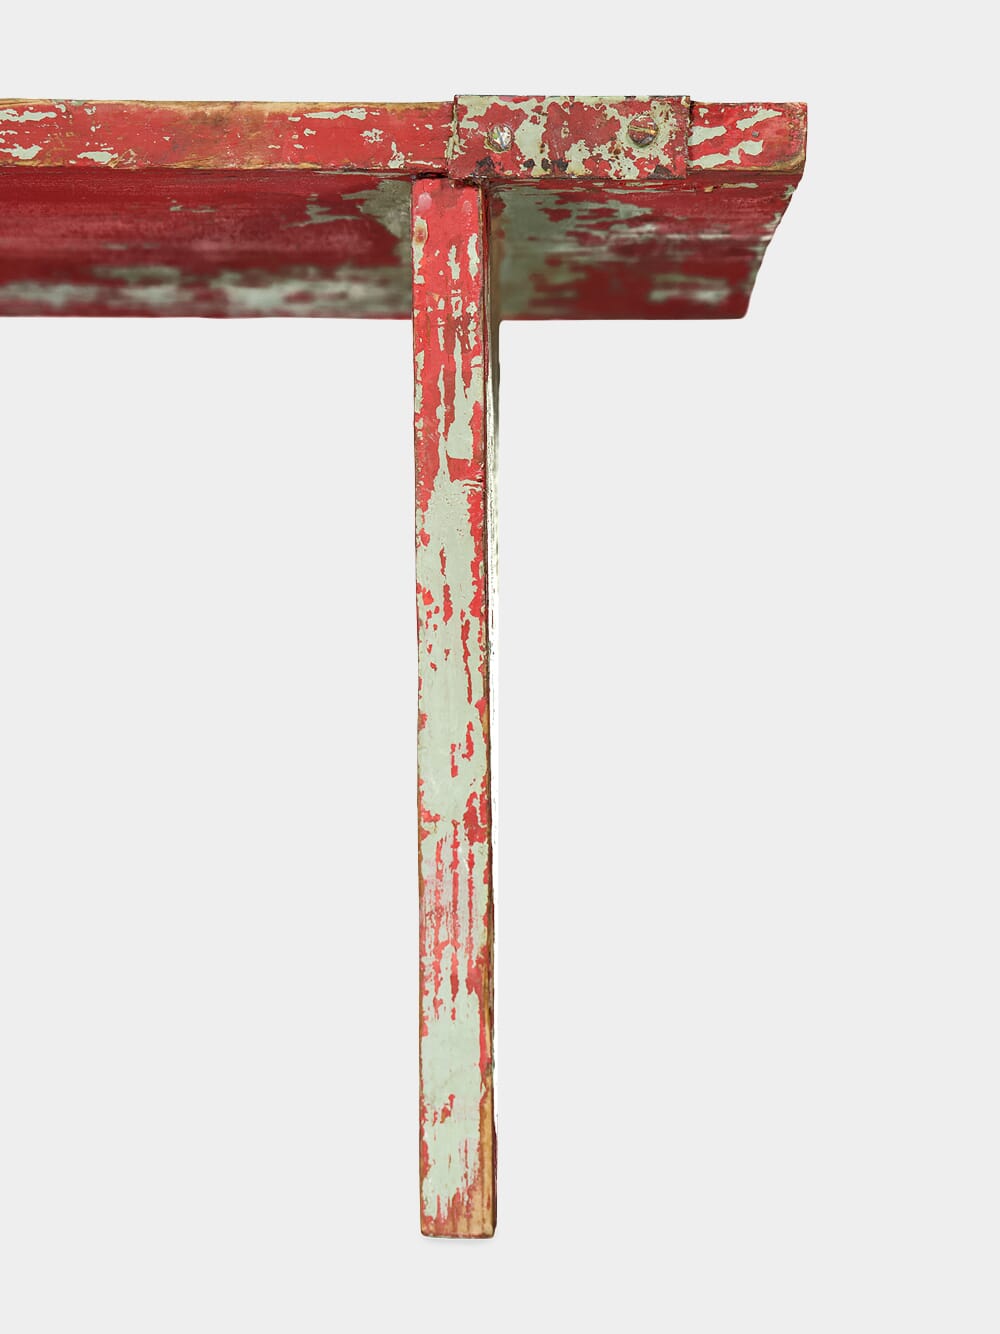 Distressed Effect Red Shelf